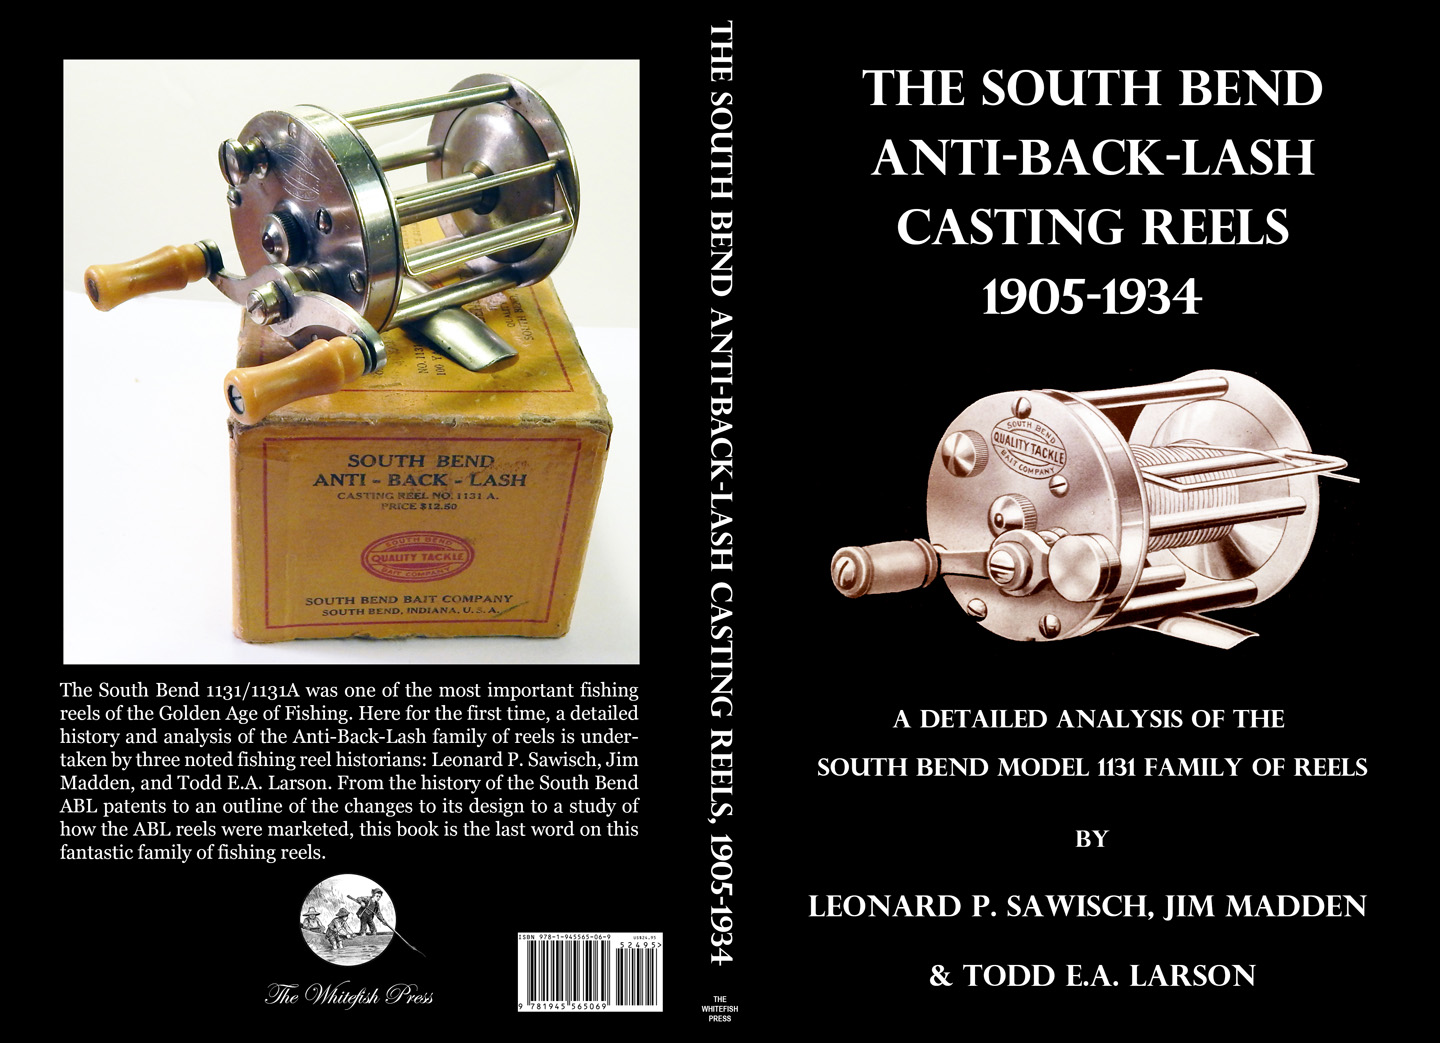 The South Bend Anti-Back-Lash Casting Reels 1905-1934 (Hard Cover